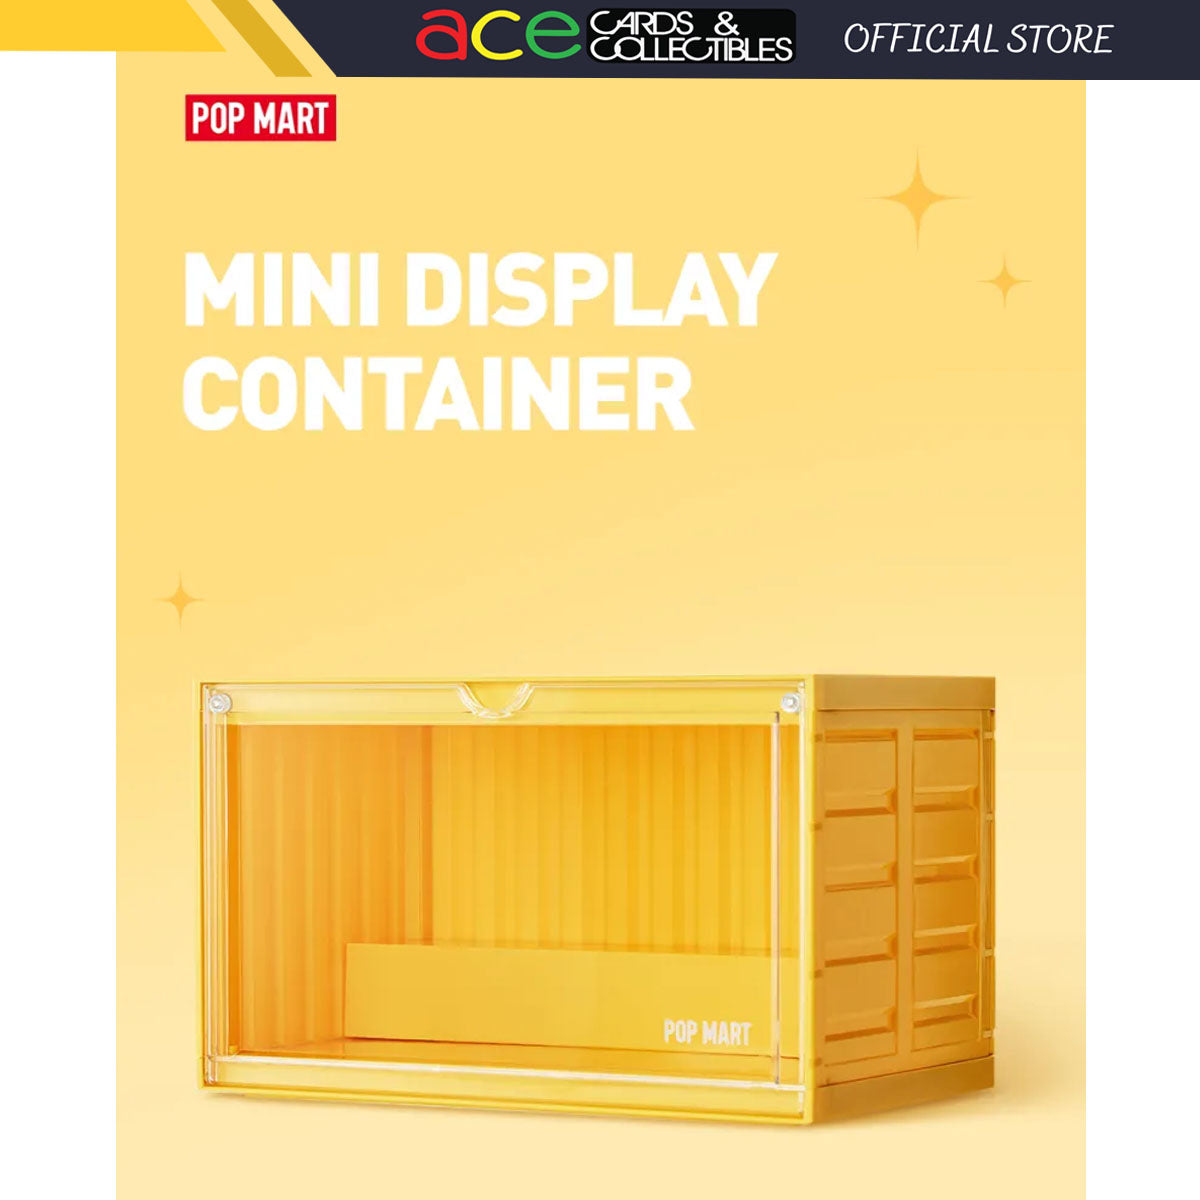 POP MART Mini Display Container (Yellow)-Pop Mart-Ace Cards & Collectibles